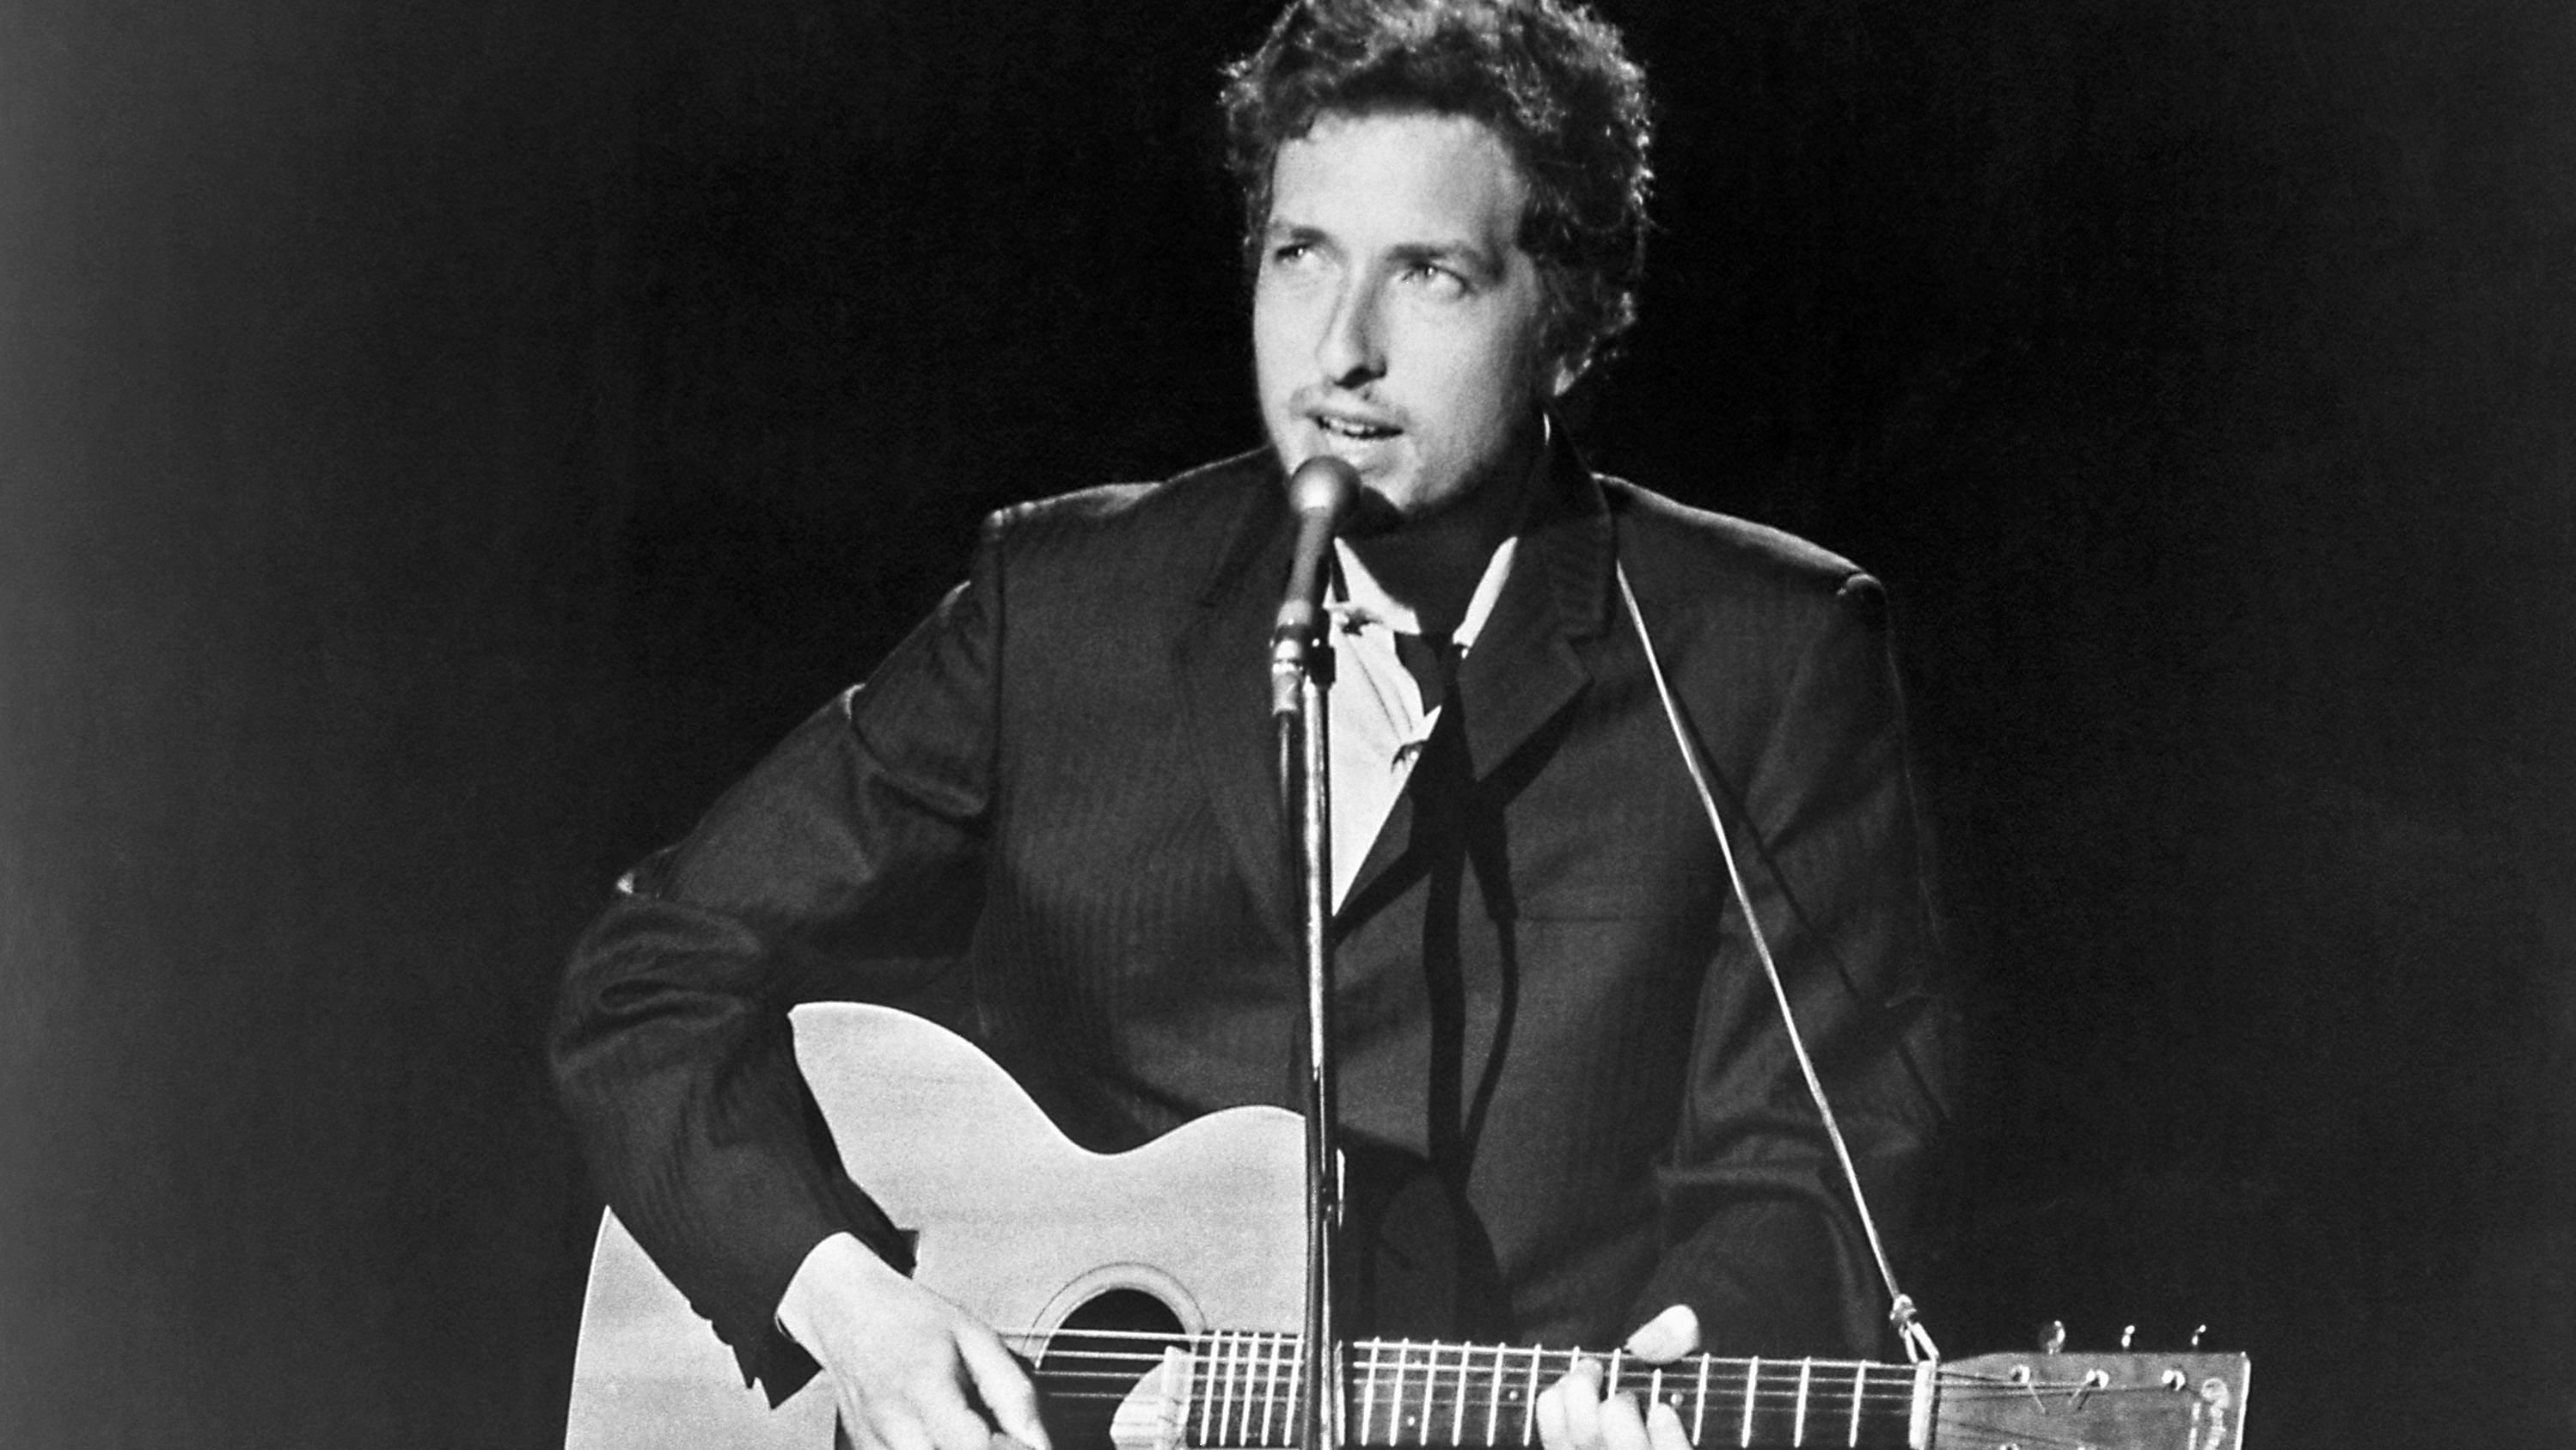 Bob Dylan's "Lay Lady Lay" reached No. 7 on the Billboard Top 100 in 1969.